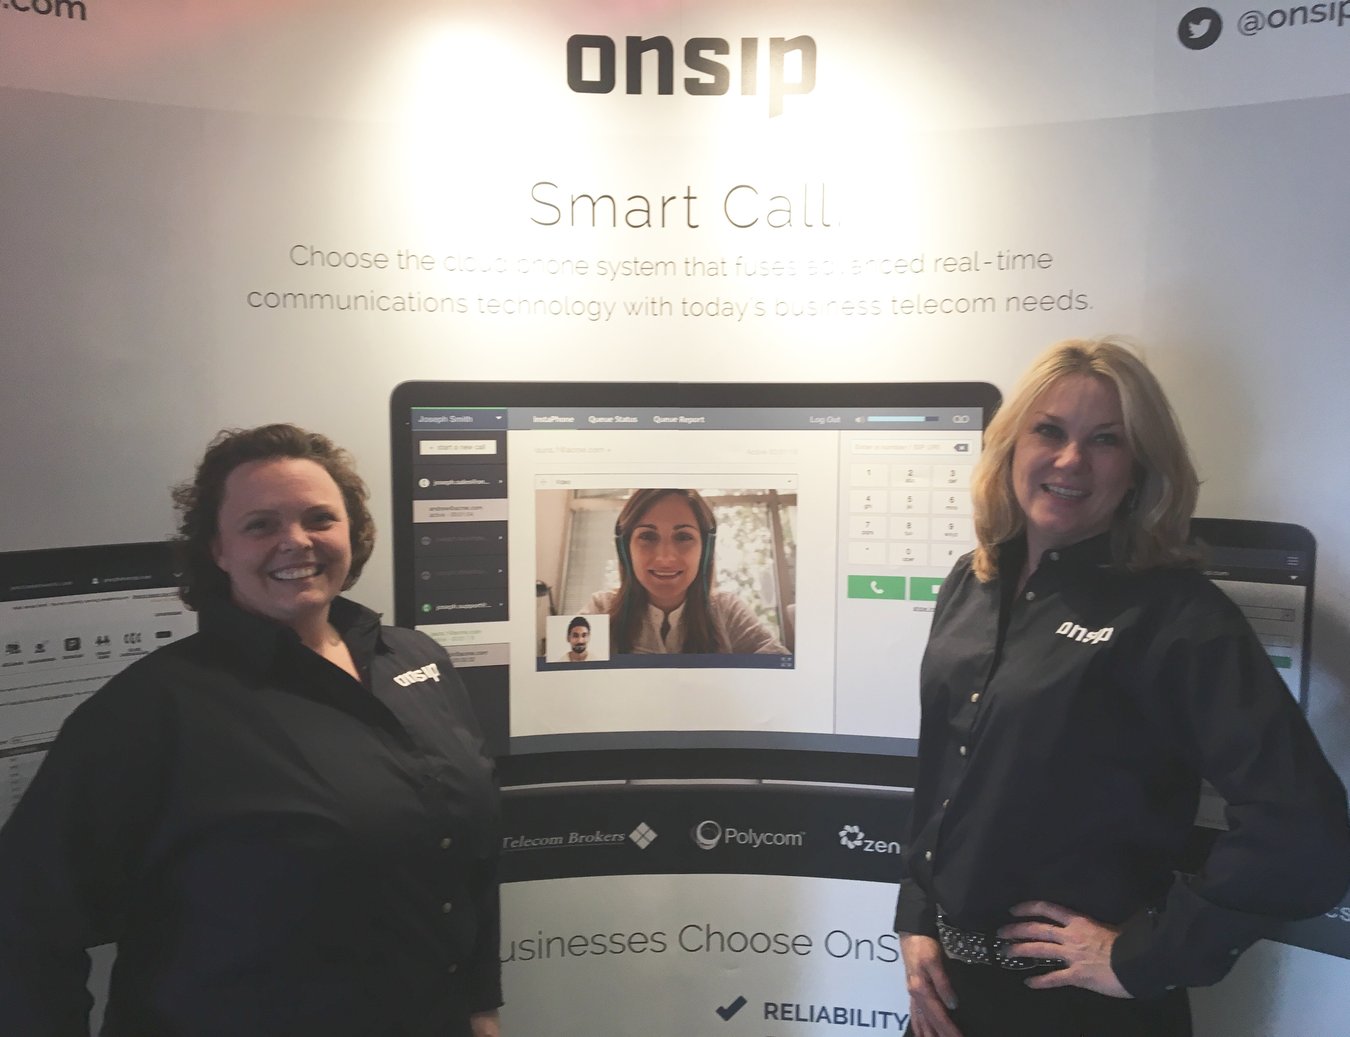 Clorece Kulp and Helene Kidary in front of OnSIP’s technology display banner